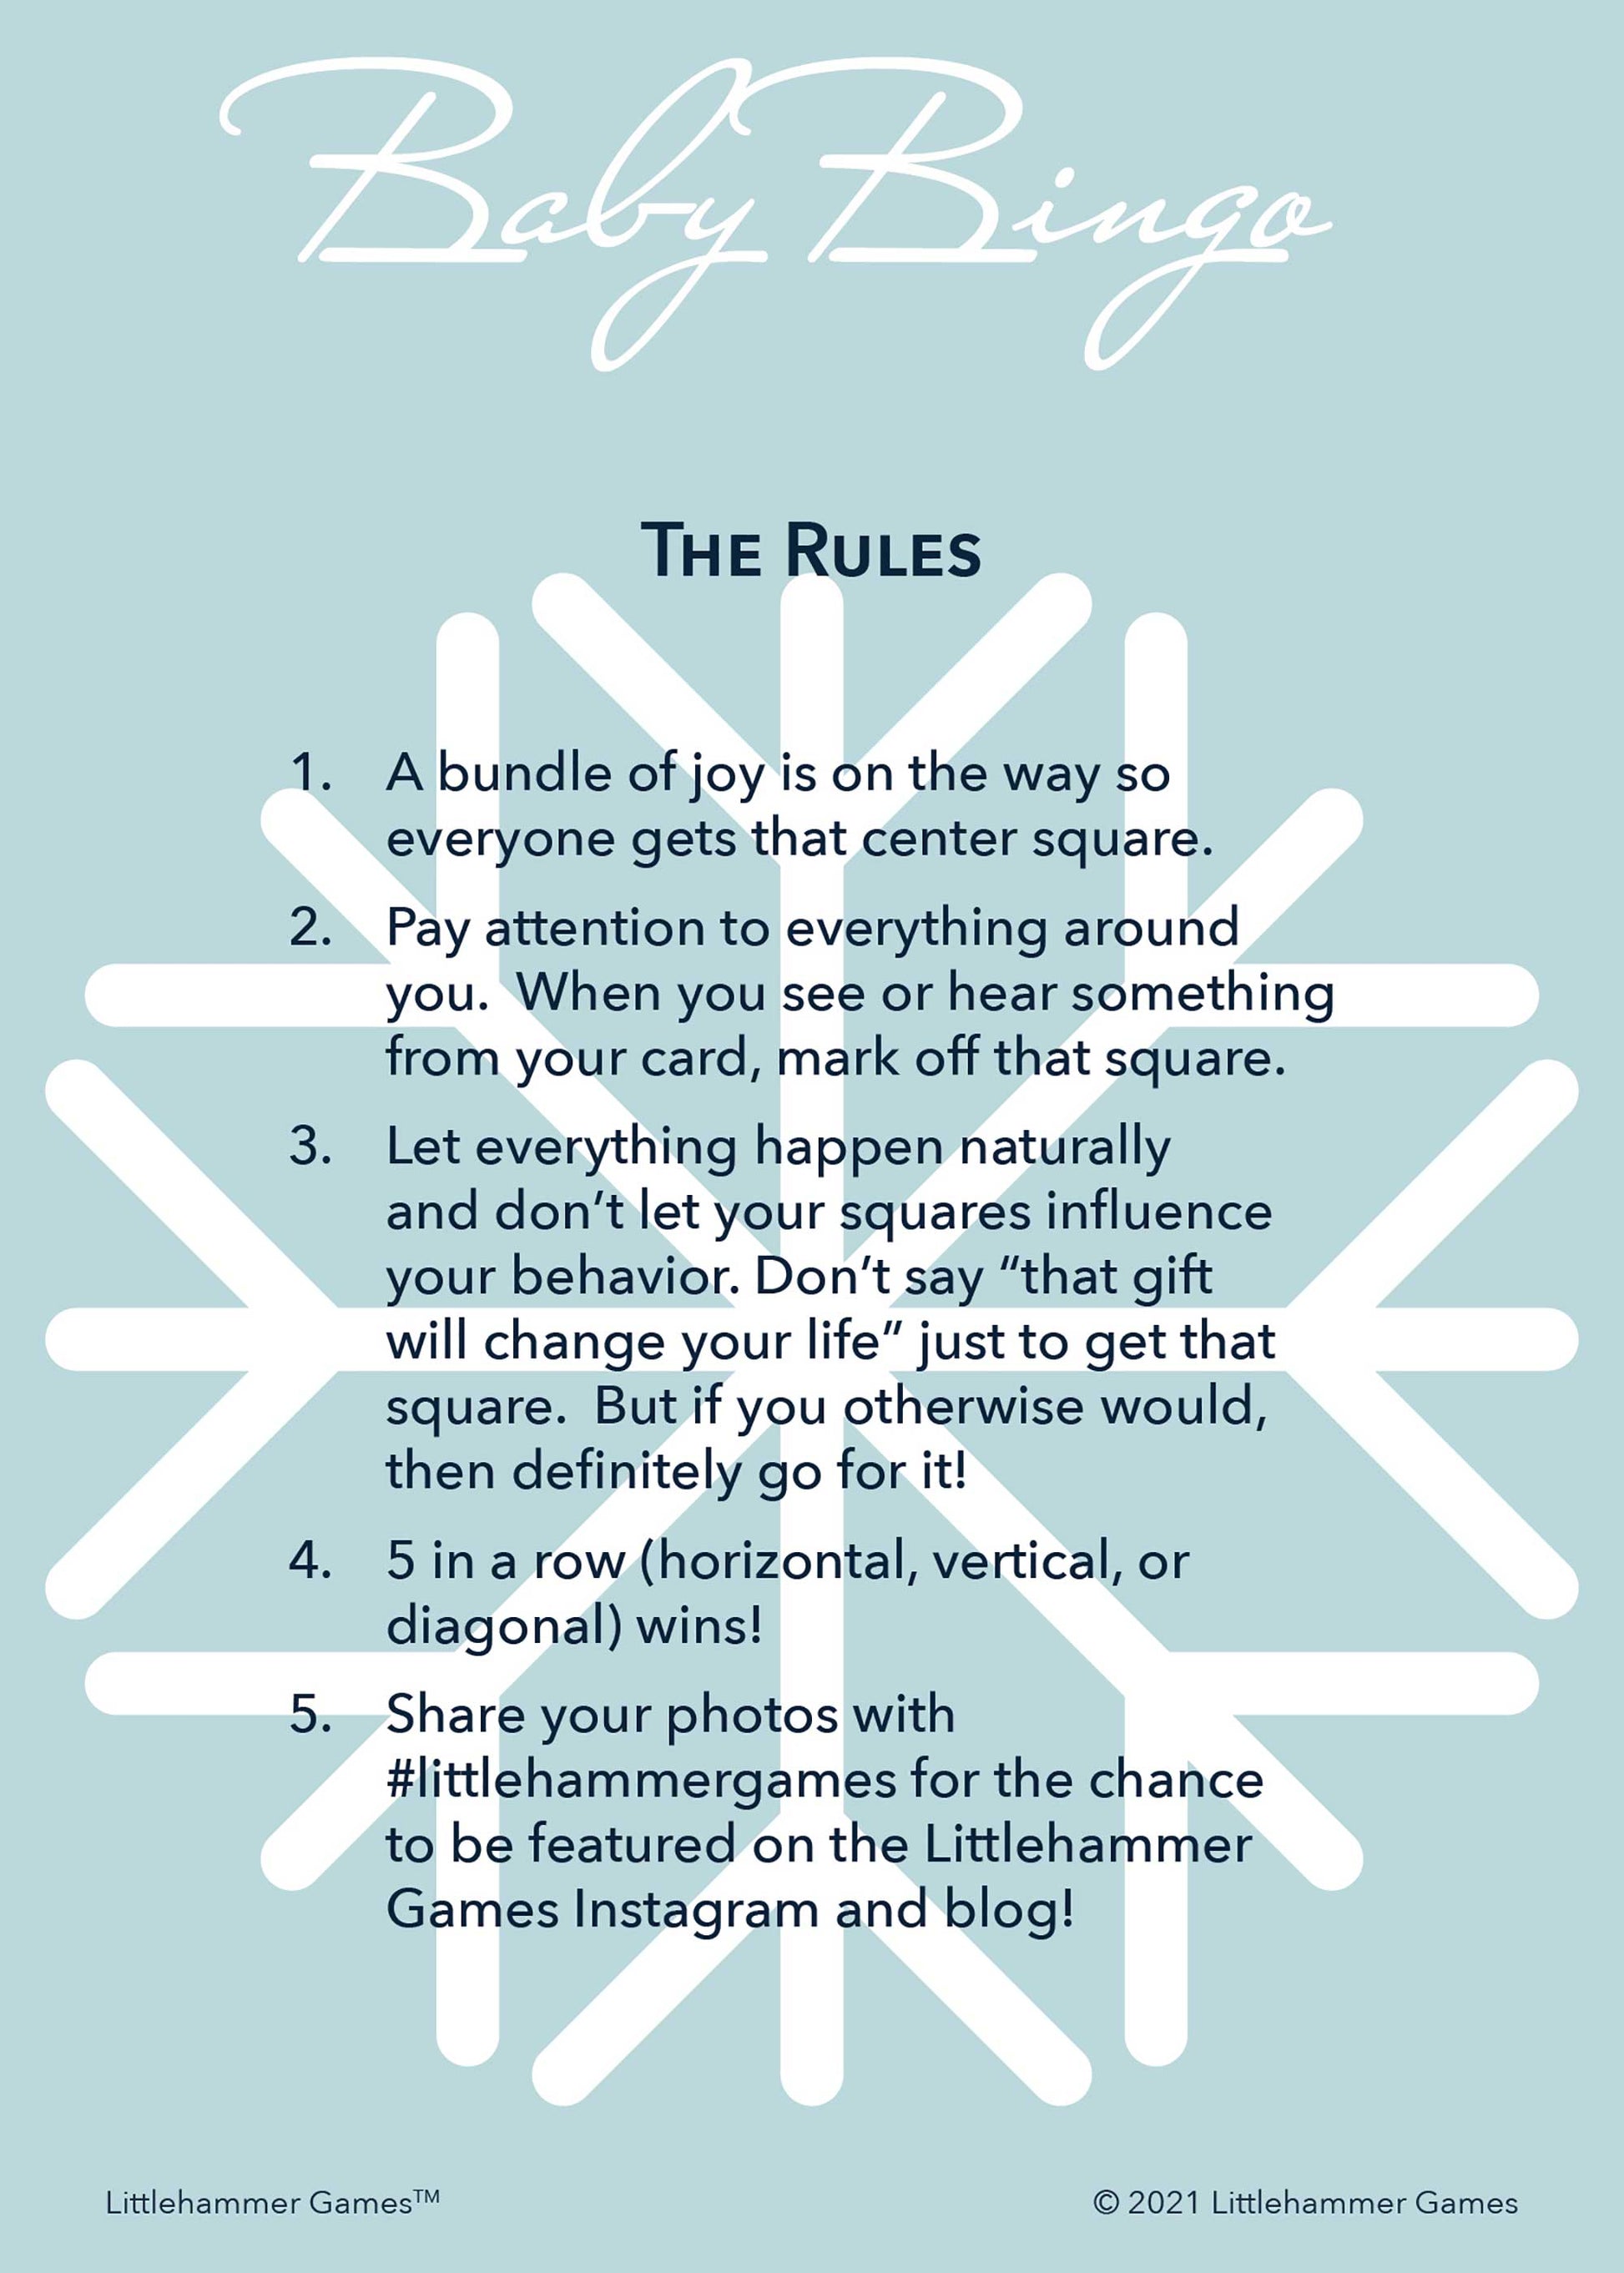 Baby Bingo rules card with a light blue snowflake background